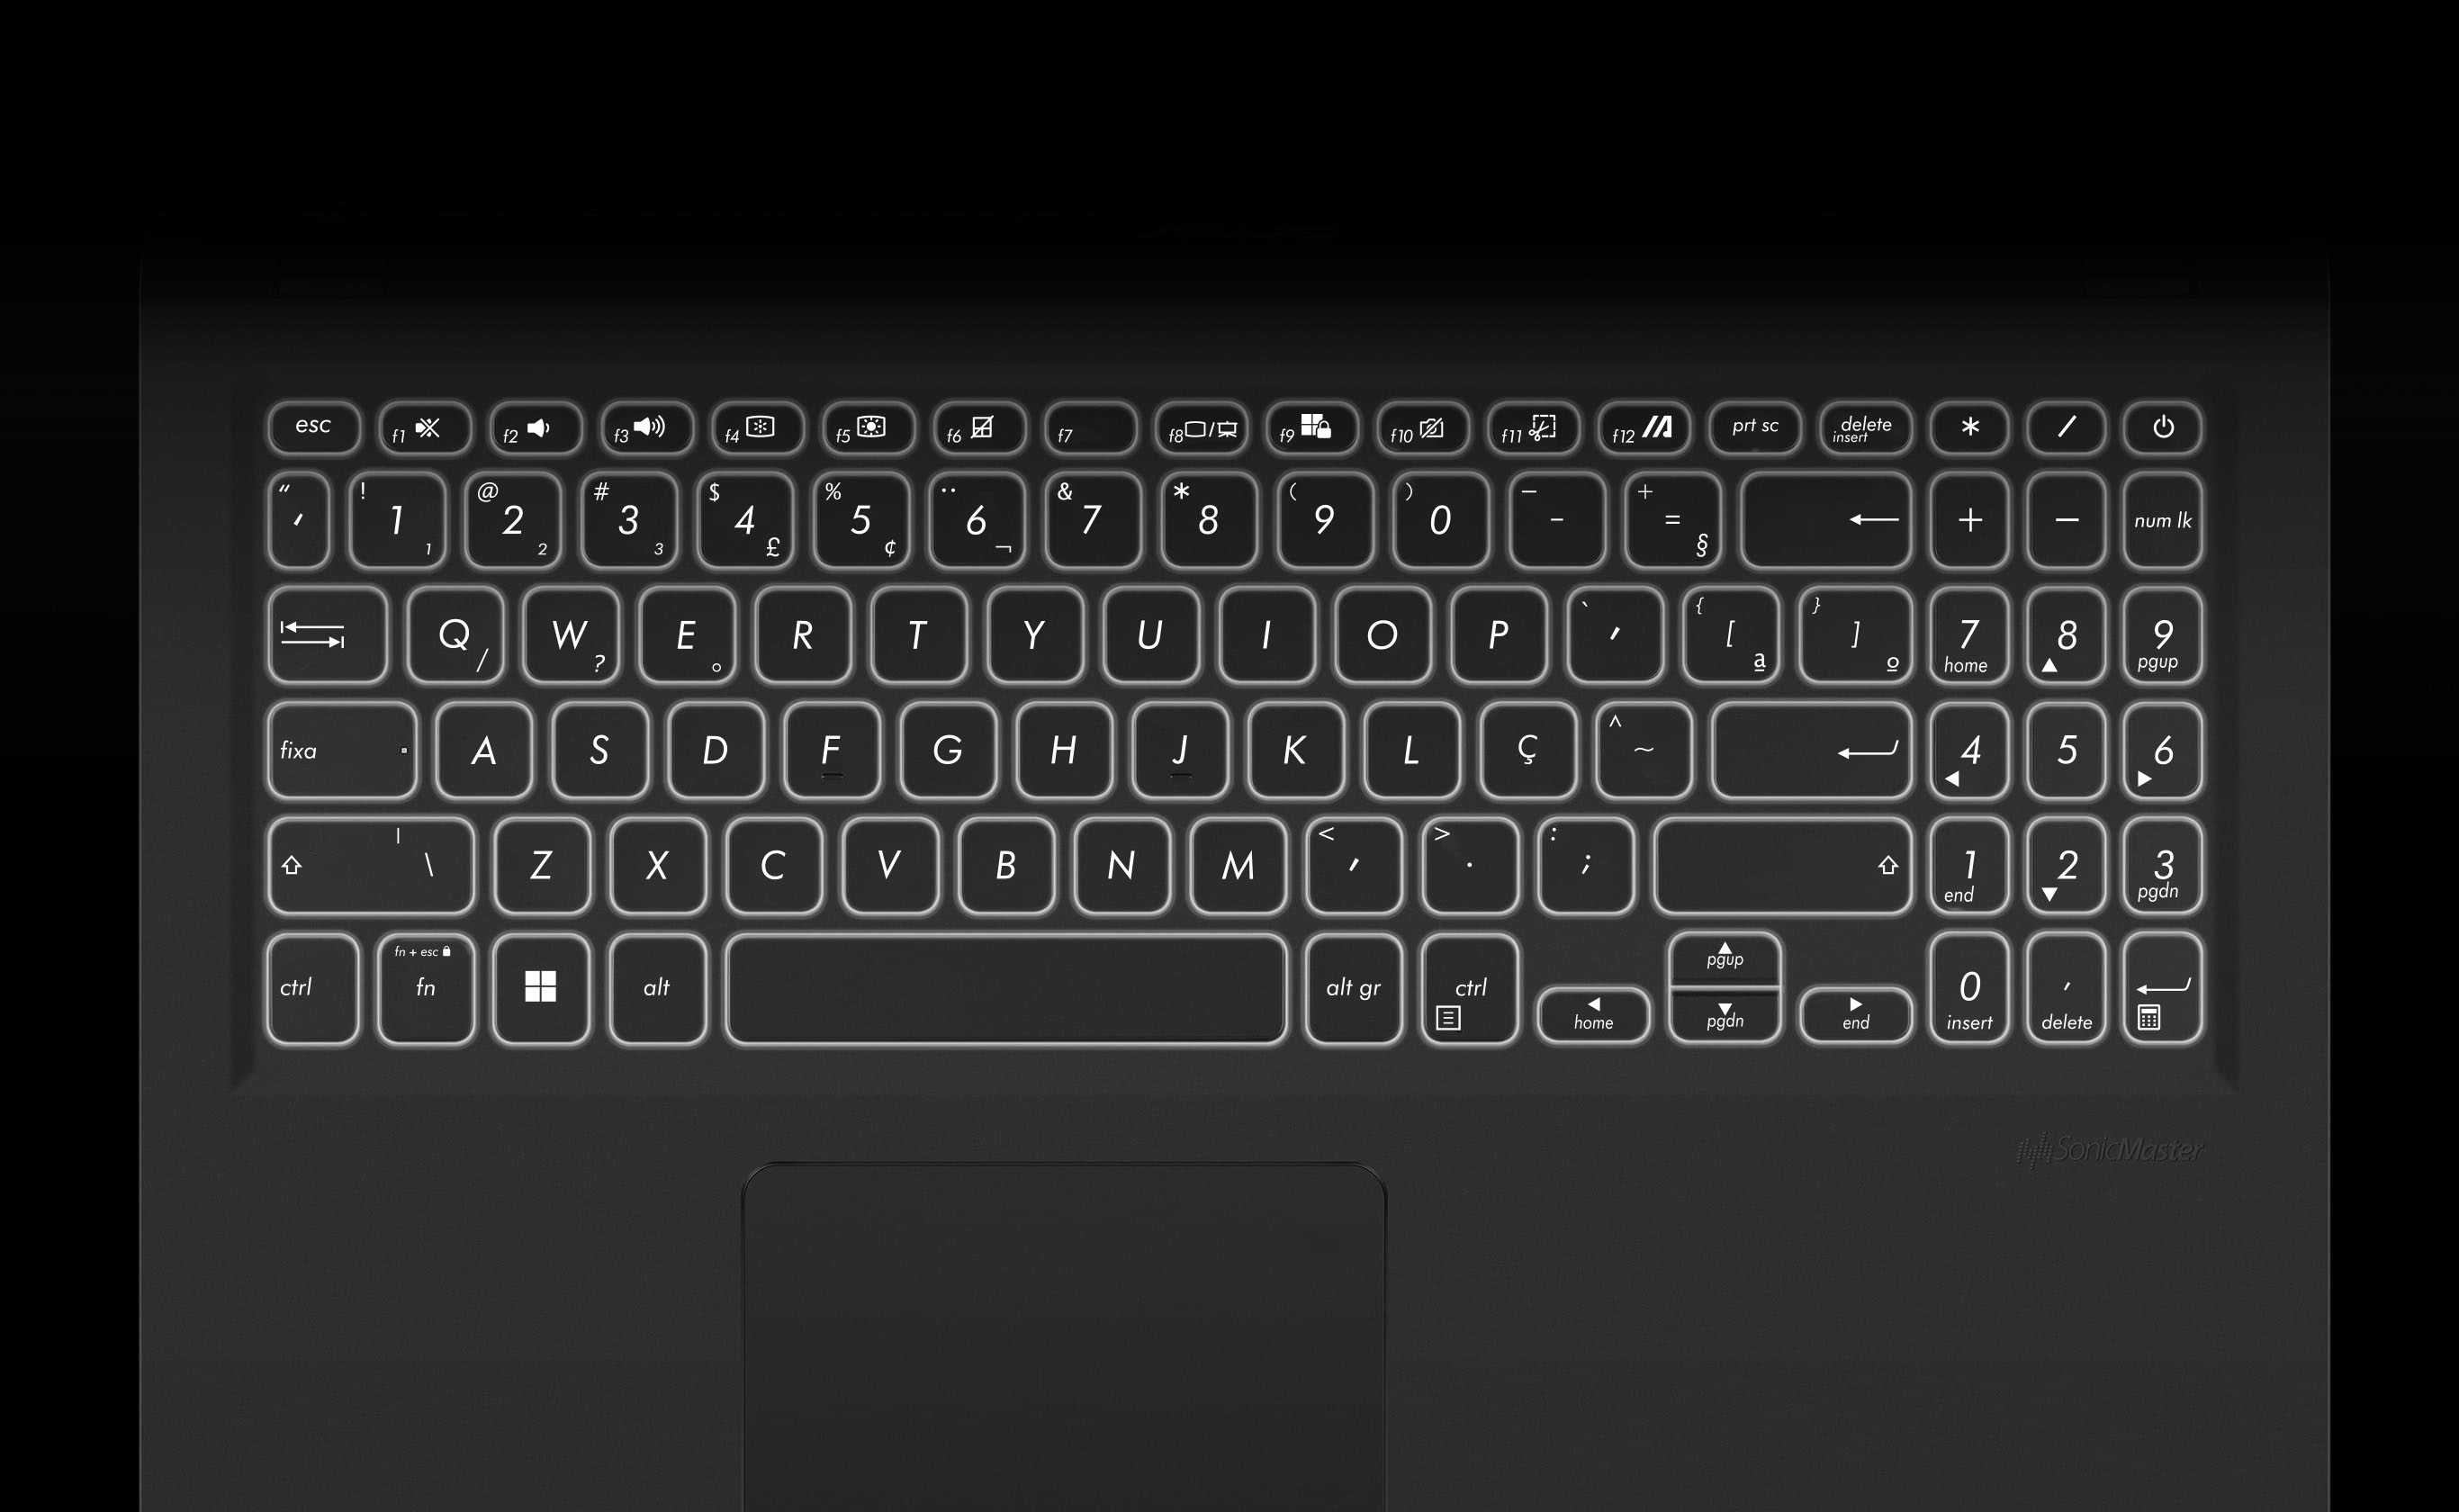 Vivobook 15 is shown close-up keyboard with backlight on.